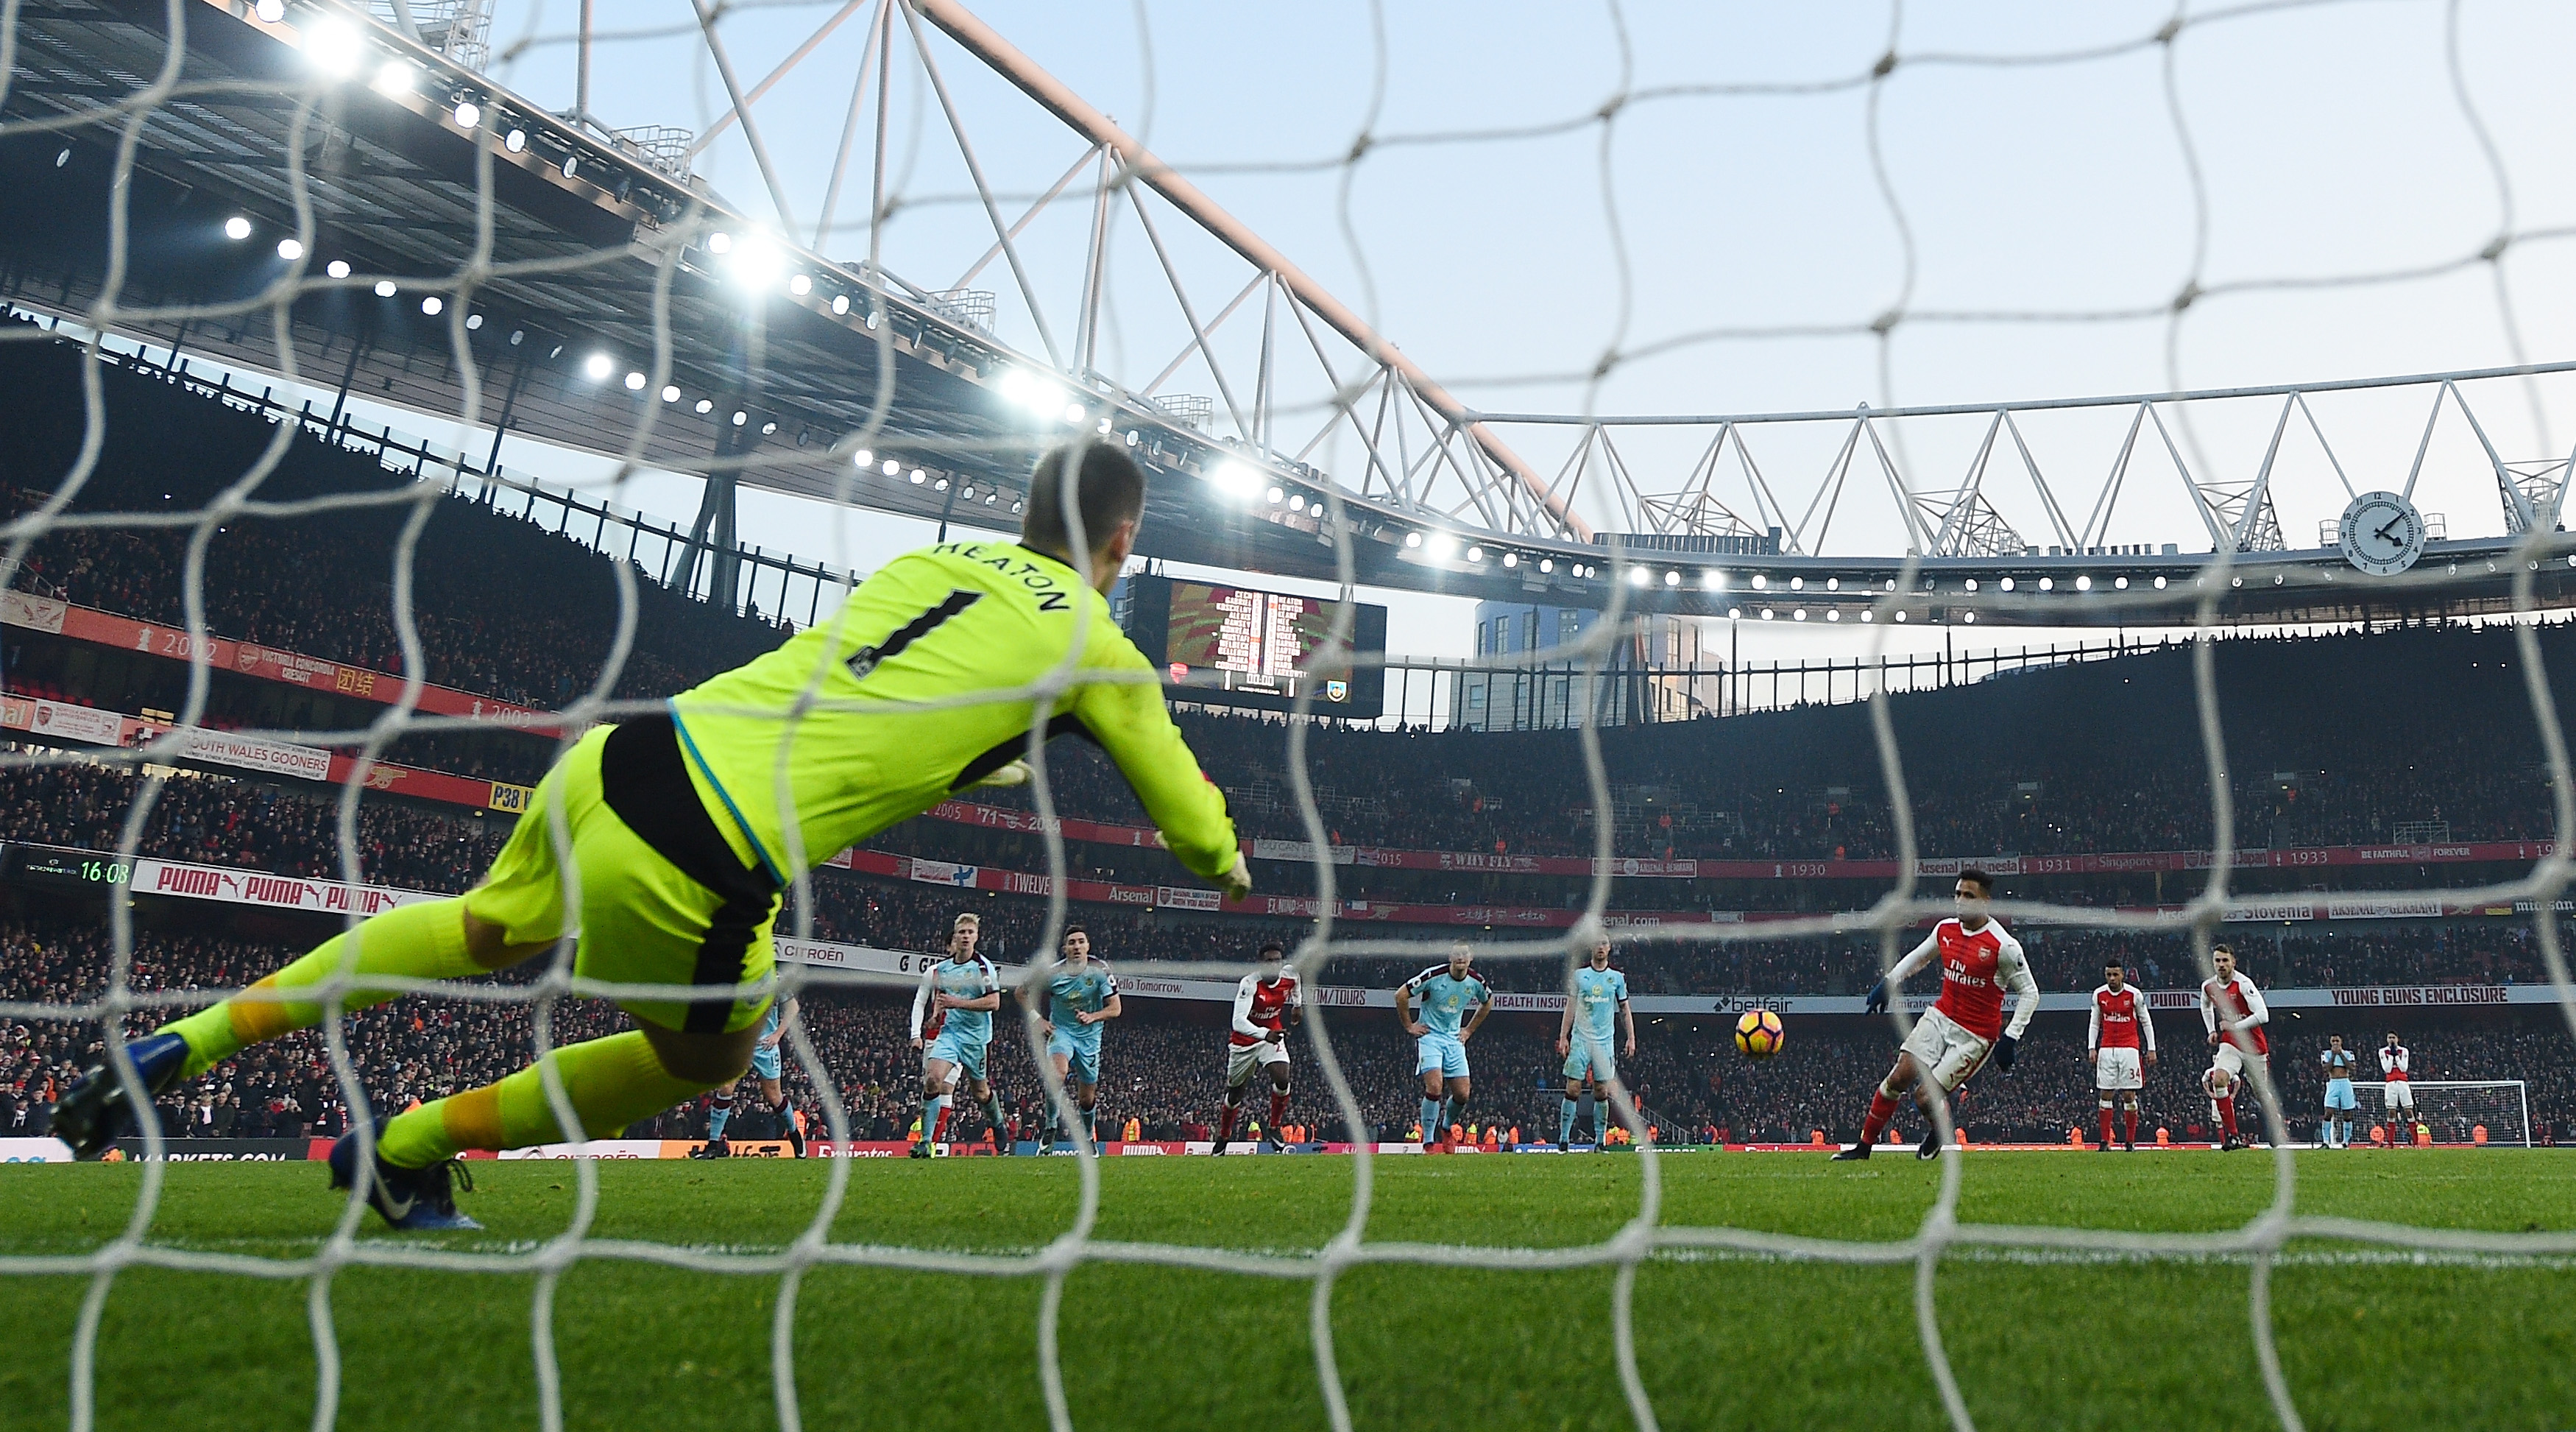 LONDON, ENGLAND - JANUARY 22: Alexis Sanchez of Arsenal converts the penalty to score his side's second goal during the Premier League match between Arsenal and Burnley at the Emirates Stadium on January 22, 2017 in London, England.  (Photo by Shaun Botterill/Getty Images)